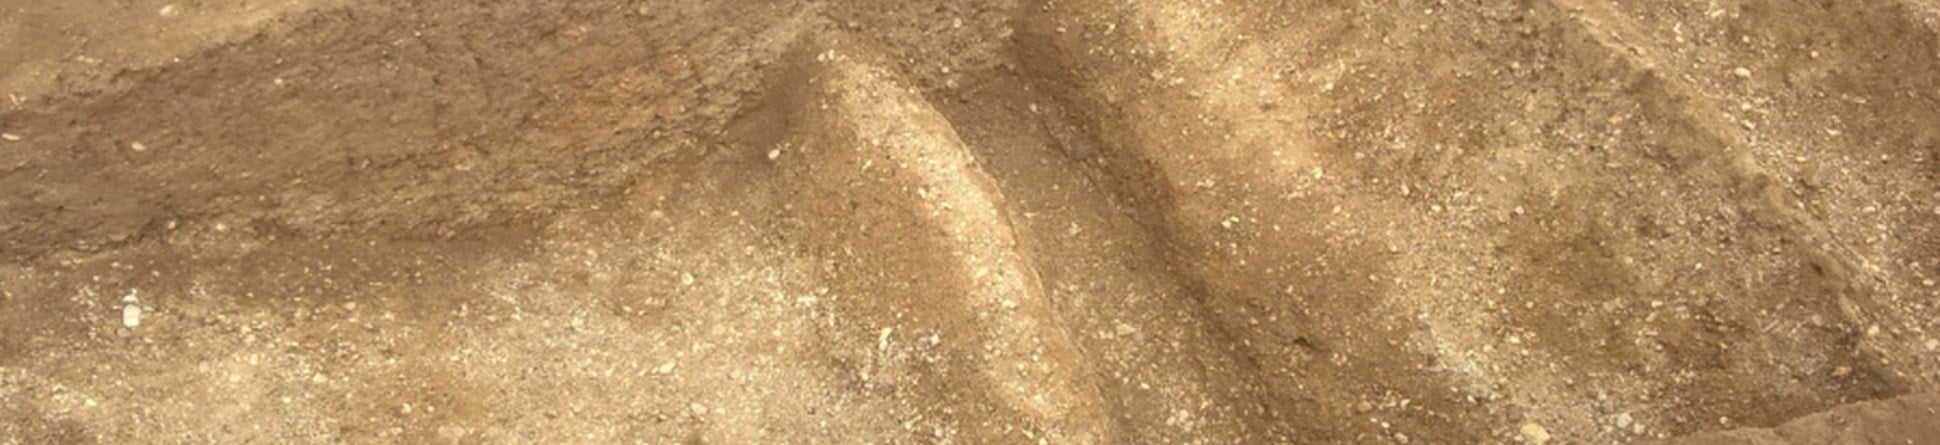 Evidence of ring ditches at Sutton Courtenay sand and gravel quarry in Oxfordshire